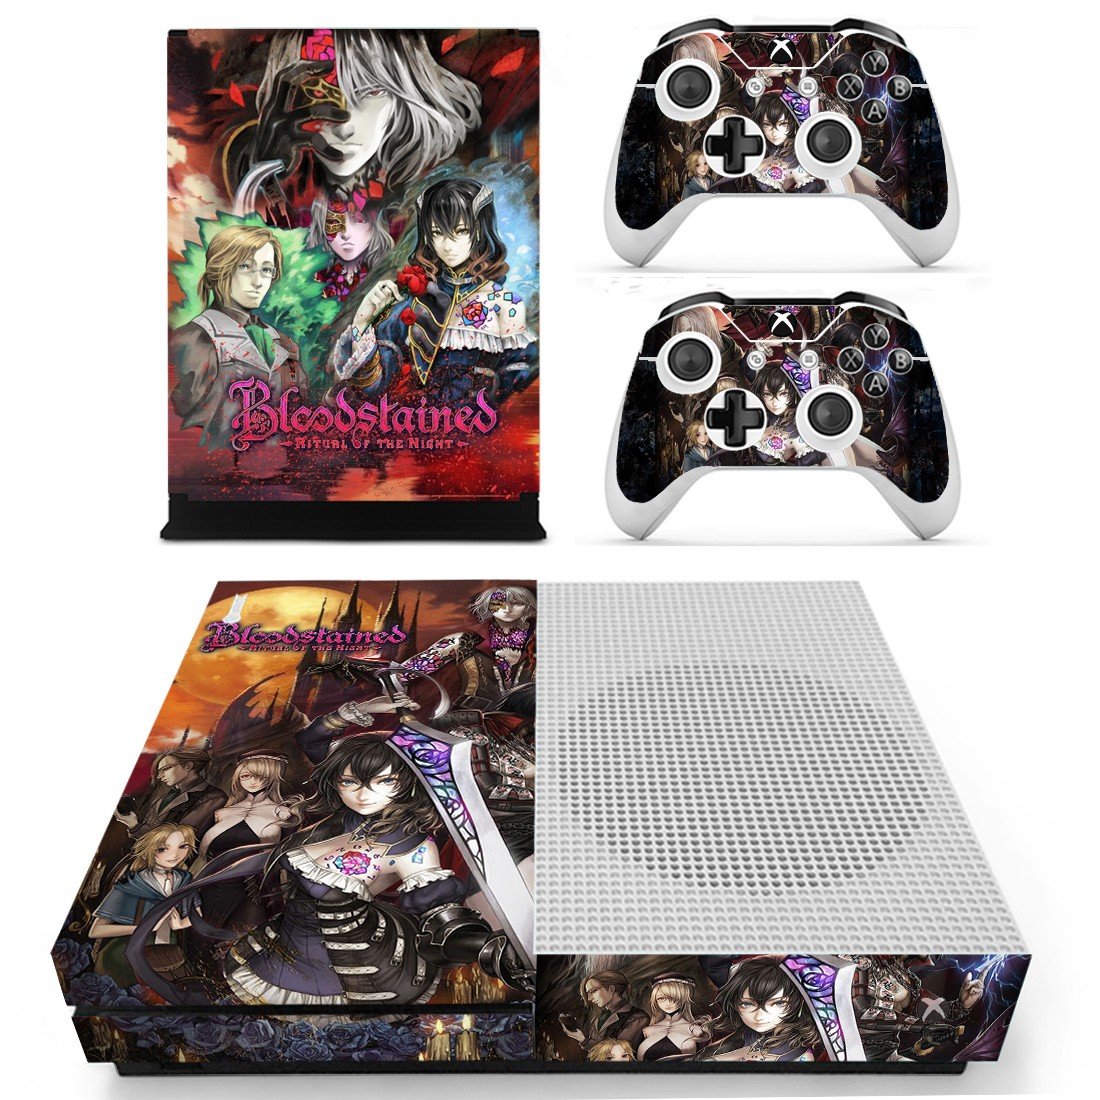 Bloodstained Ritual Of The Night Decal Skin Sticker For Xbox One S Console And Controllers